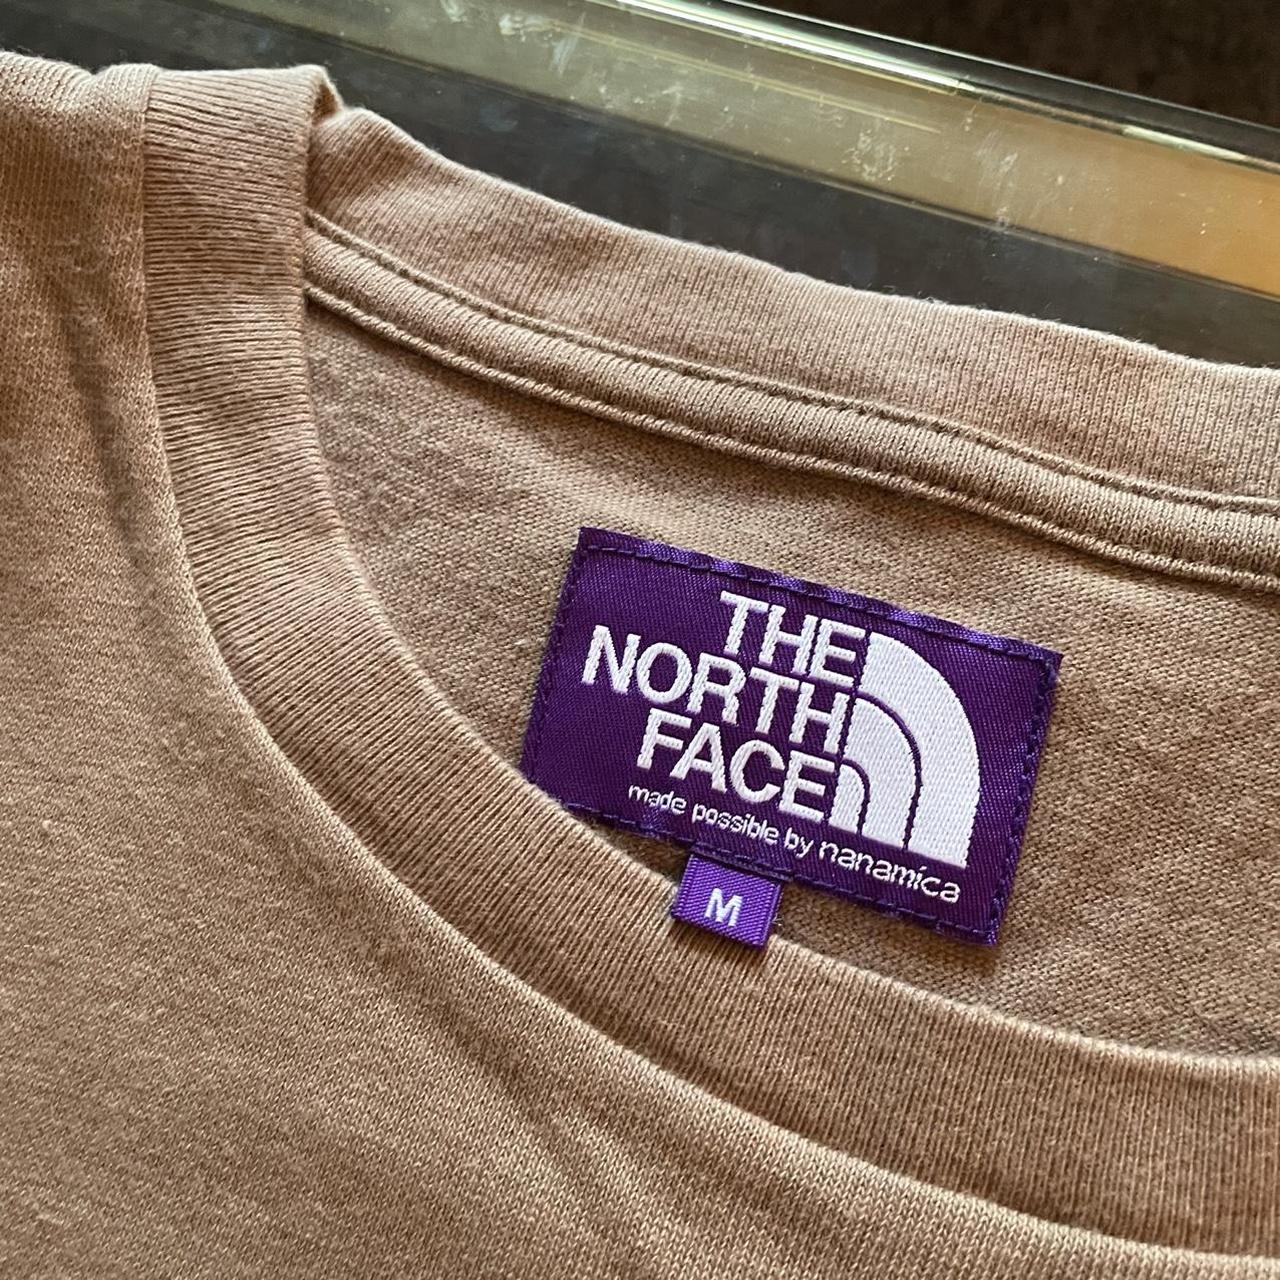 The North Face Purple Label Men's Tan and Brown T-shirt (3)